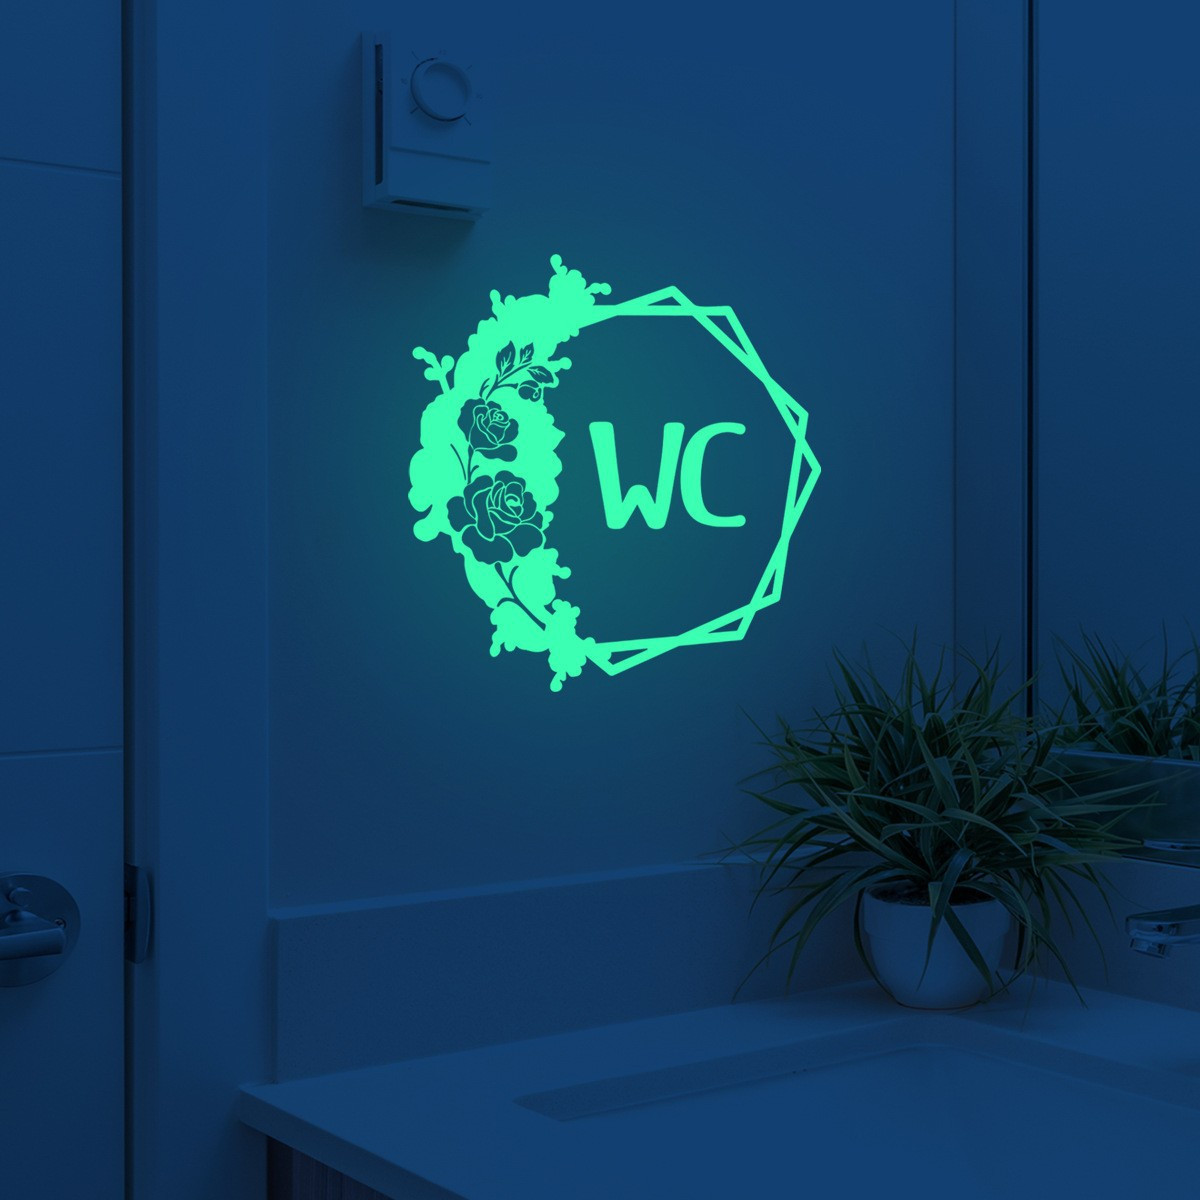 

Wc Luminous Decal Door Sign Sticker, Green,glow In The Dark Wall Sticker, Removable Pvc Sticker, Self-adhesive Toilet Placard For Home Office Decoration